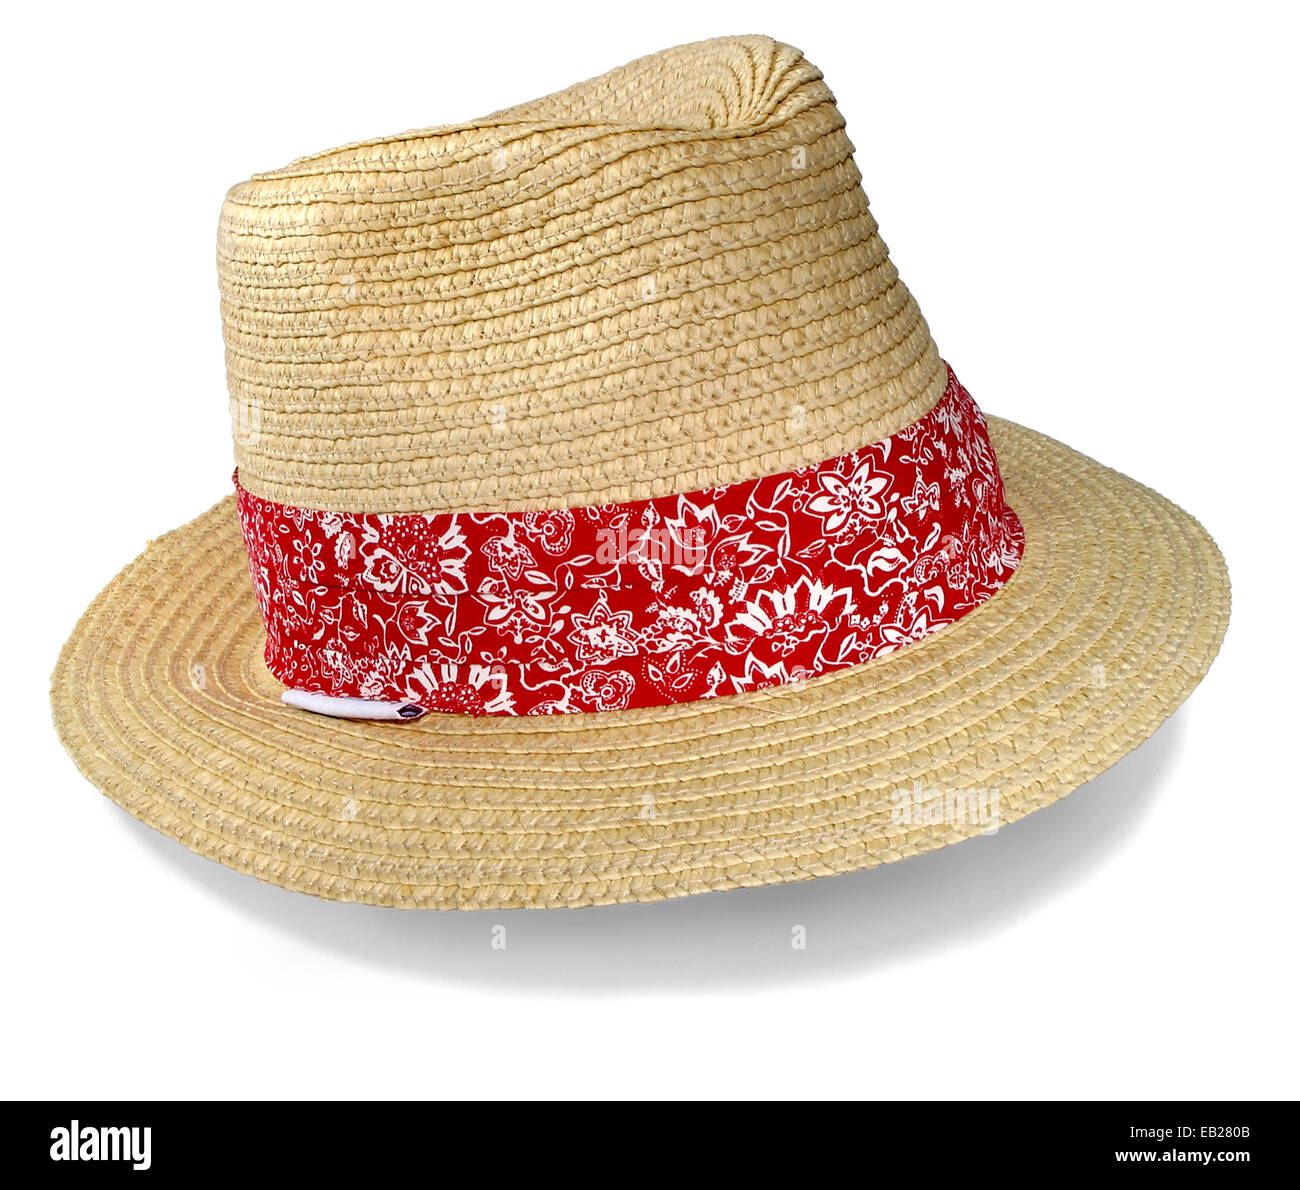 Hat Band Stock Photos & Hat Band Stock Images - Alamy